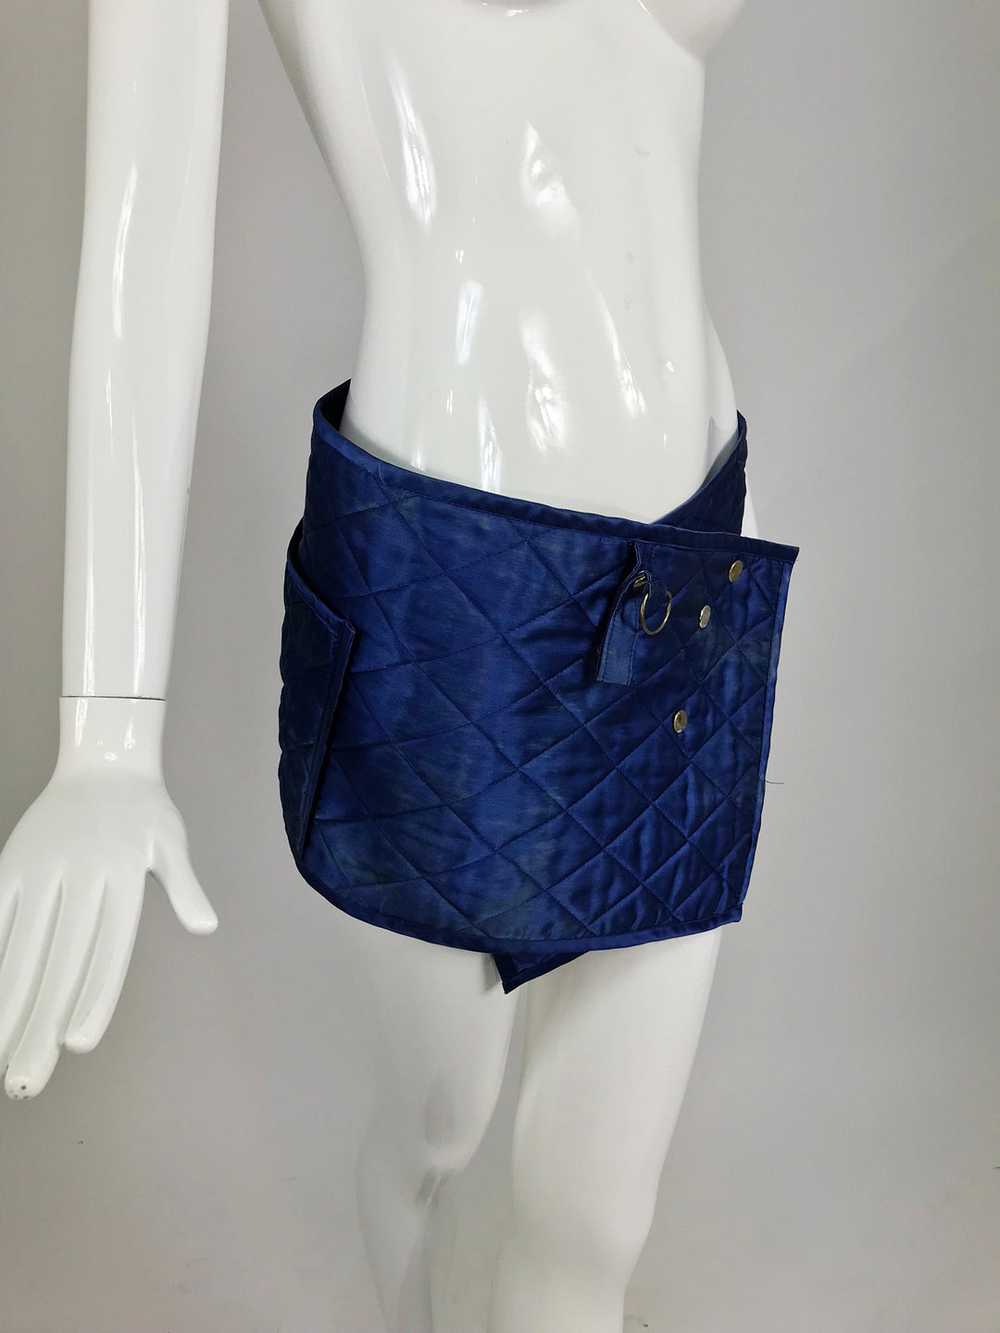 Sonia Rykiel quilted blue satin belt or skirt wit… - image 11